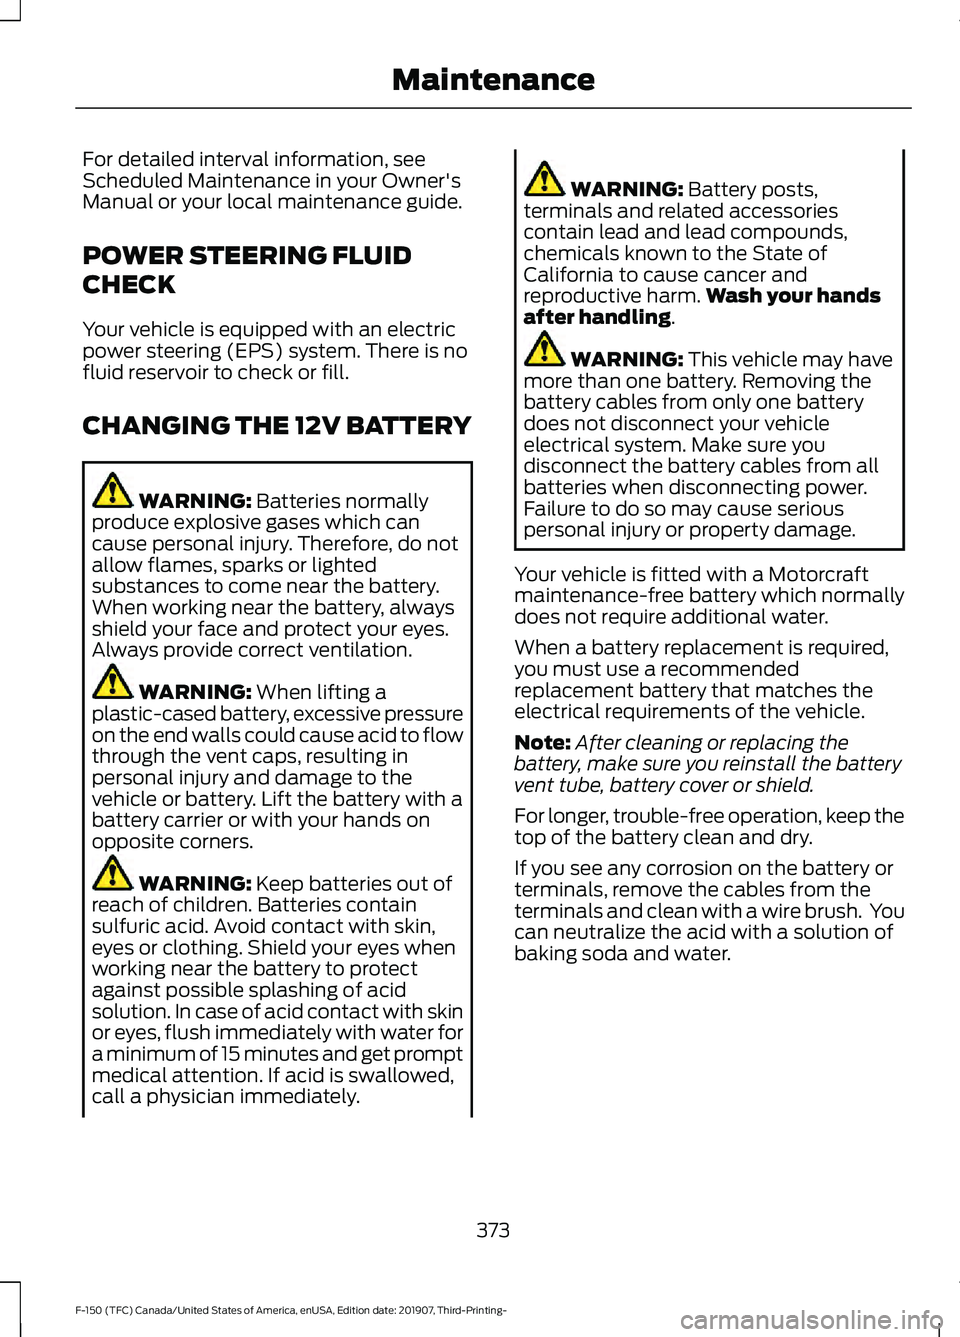 FORD F-150 2020  Owners Manual For detailed interval information, see
Scheduled Maintenance in your Owner's
Manual or your local maintenance guide.
POWER STEERING FLUID
CHECK
Your vehicle is equipped with an electric
power stee